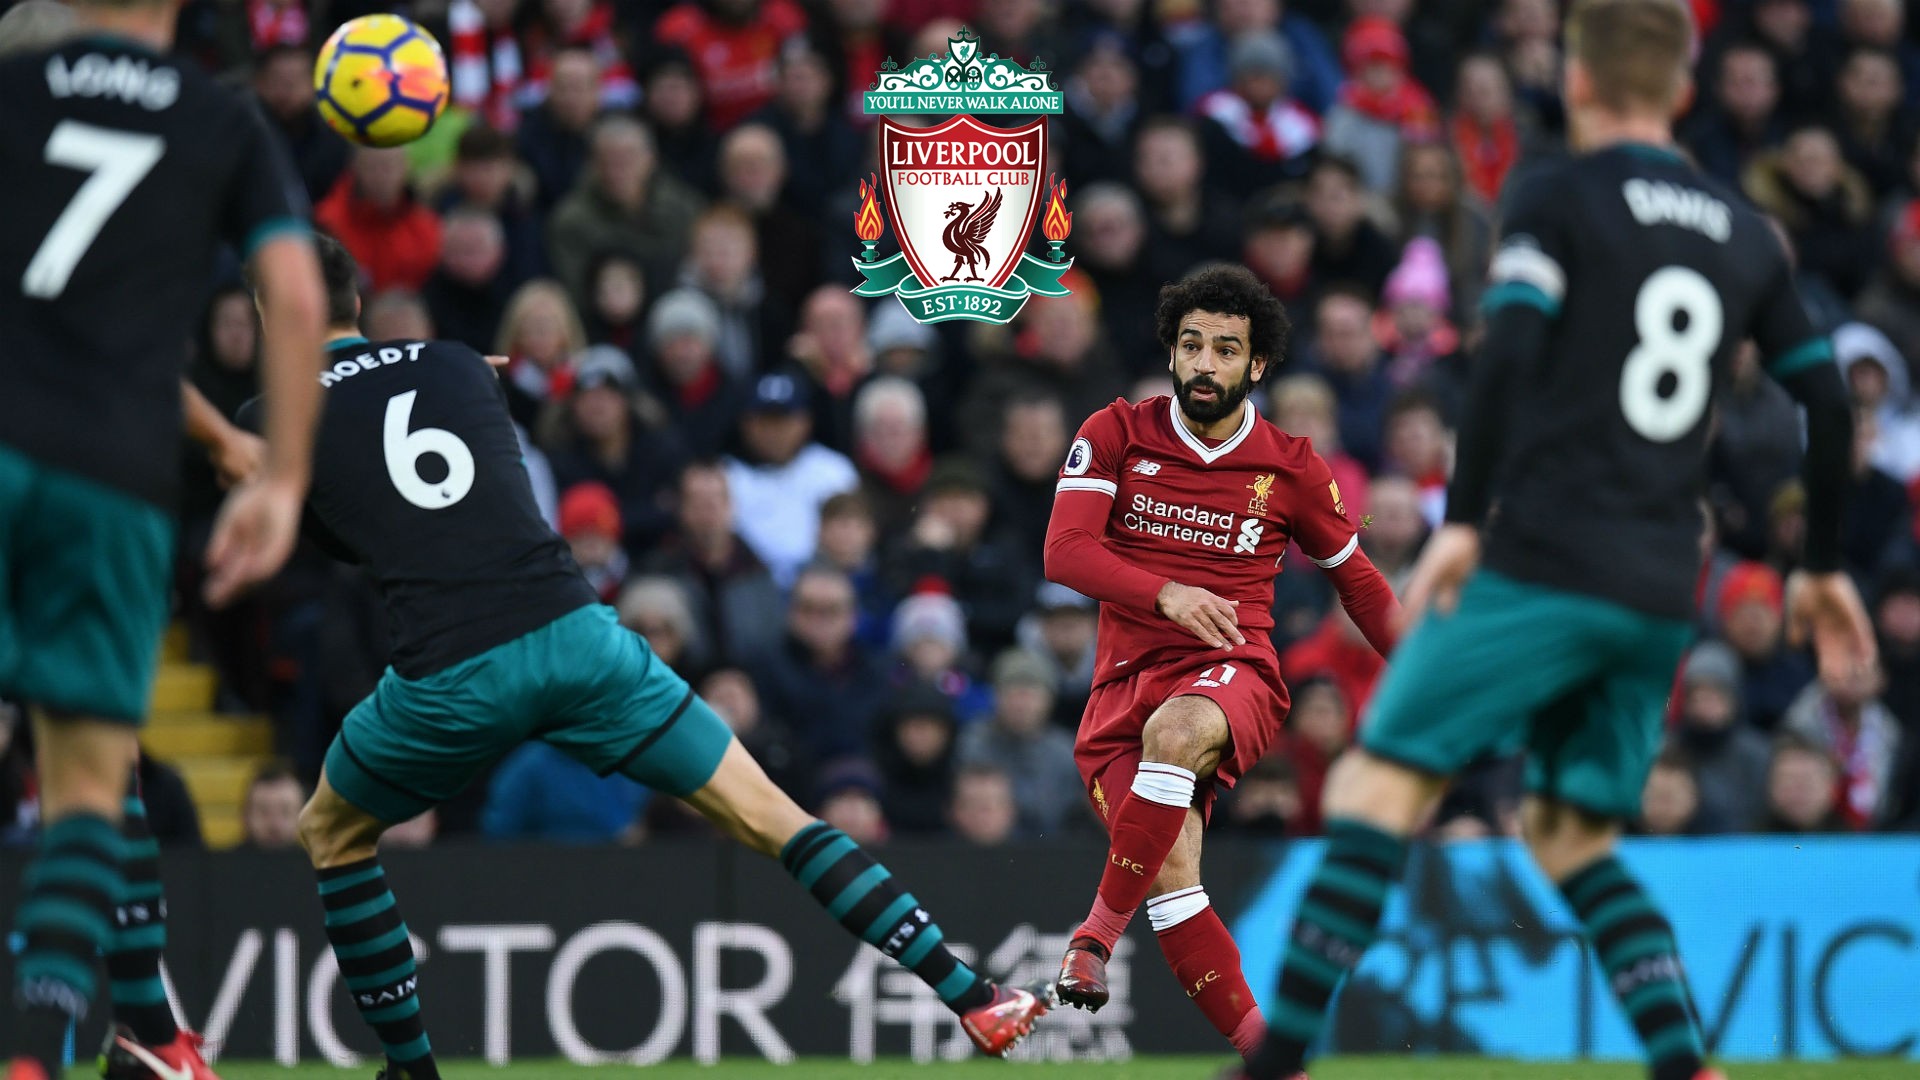 Wallpaper HD Mohamed Salah With Resolution 1920X1080 pixel. You can make this wallpaper for your Desktop Computer Backgrounds, Mac Wallpapers, Android Lock screen or iPhone Screensavers